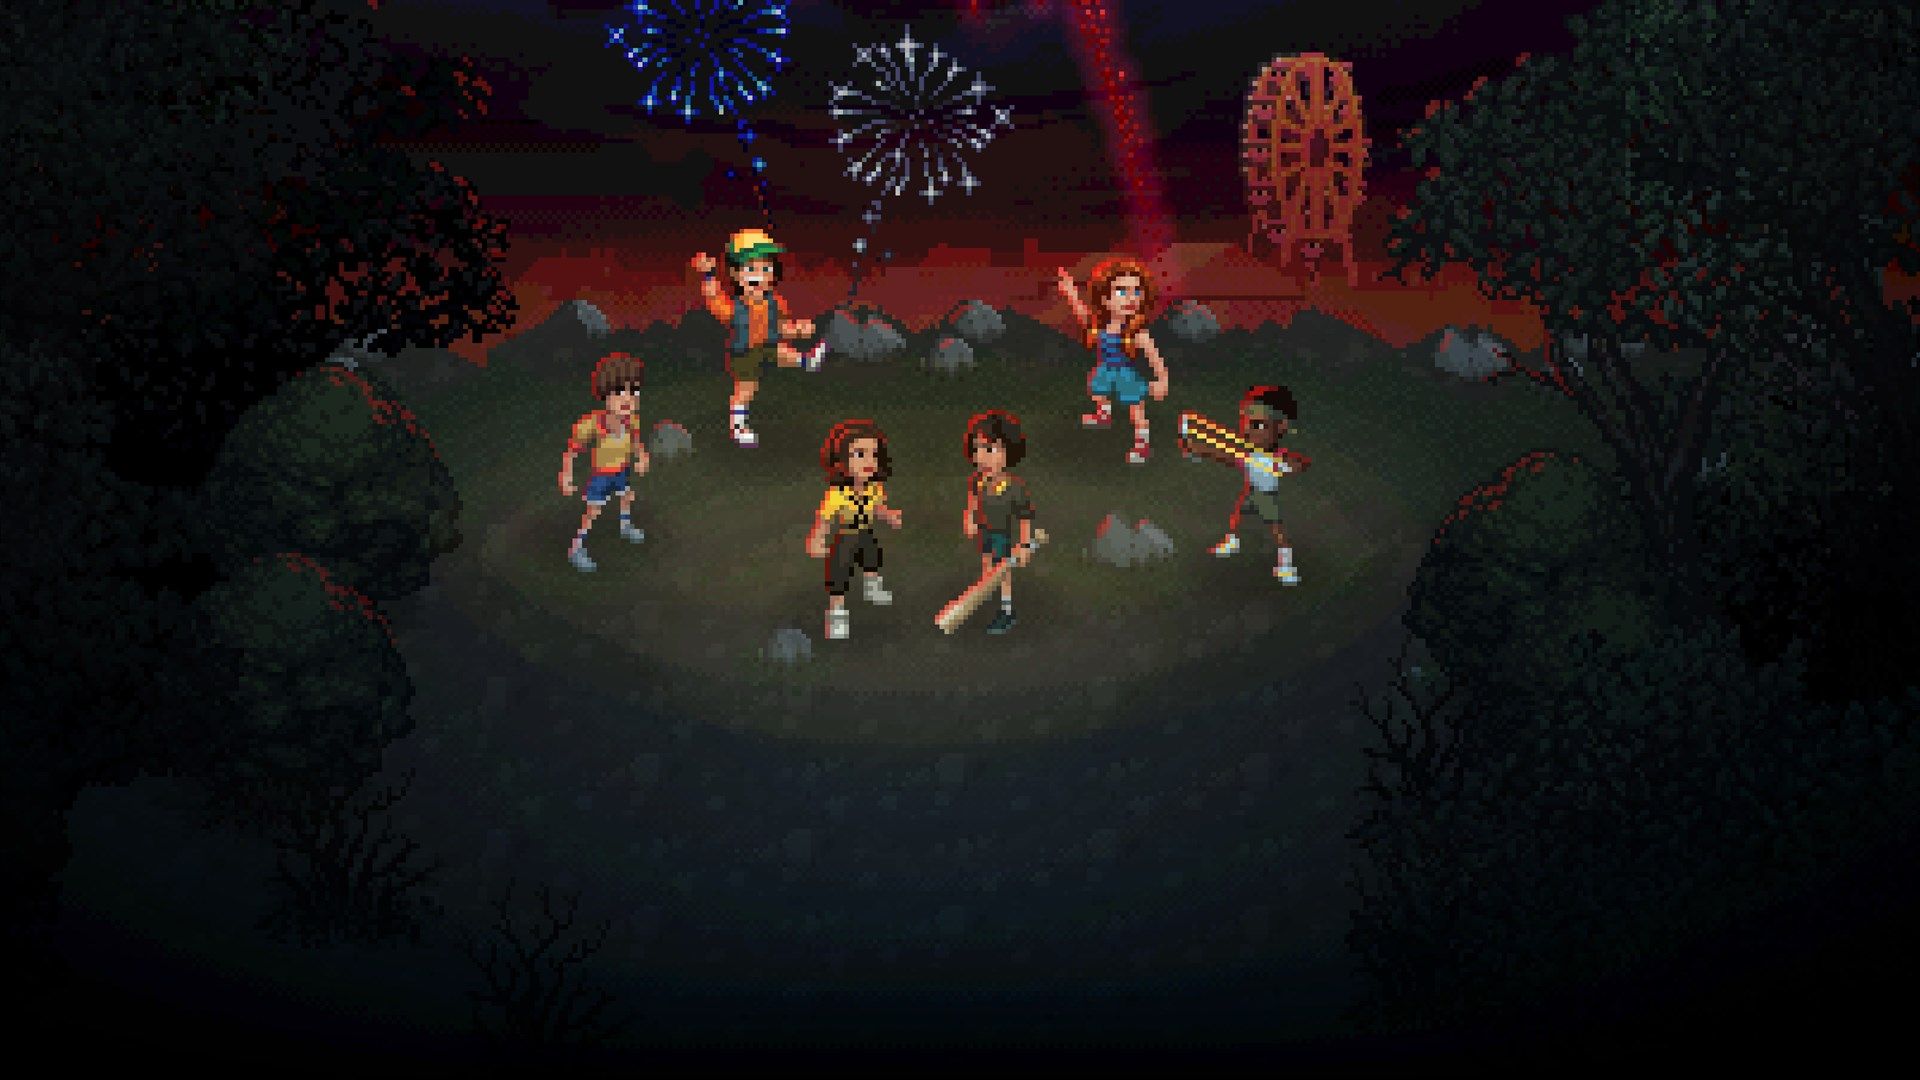 Stranger Things 3: The Game releases alongside the show on Xbox